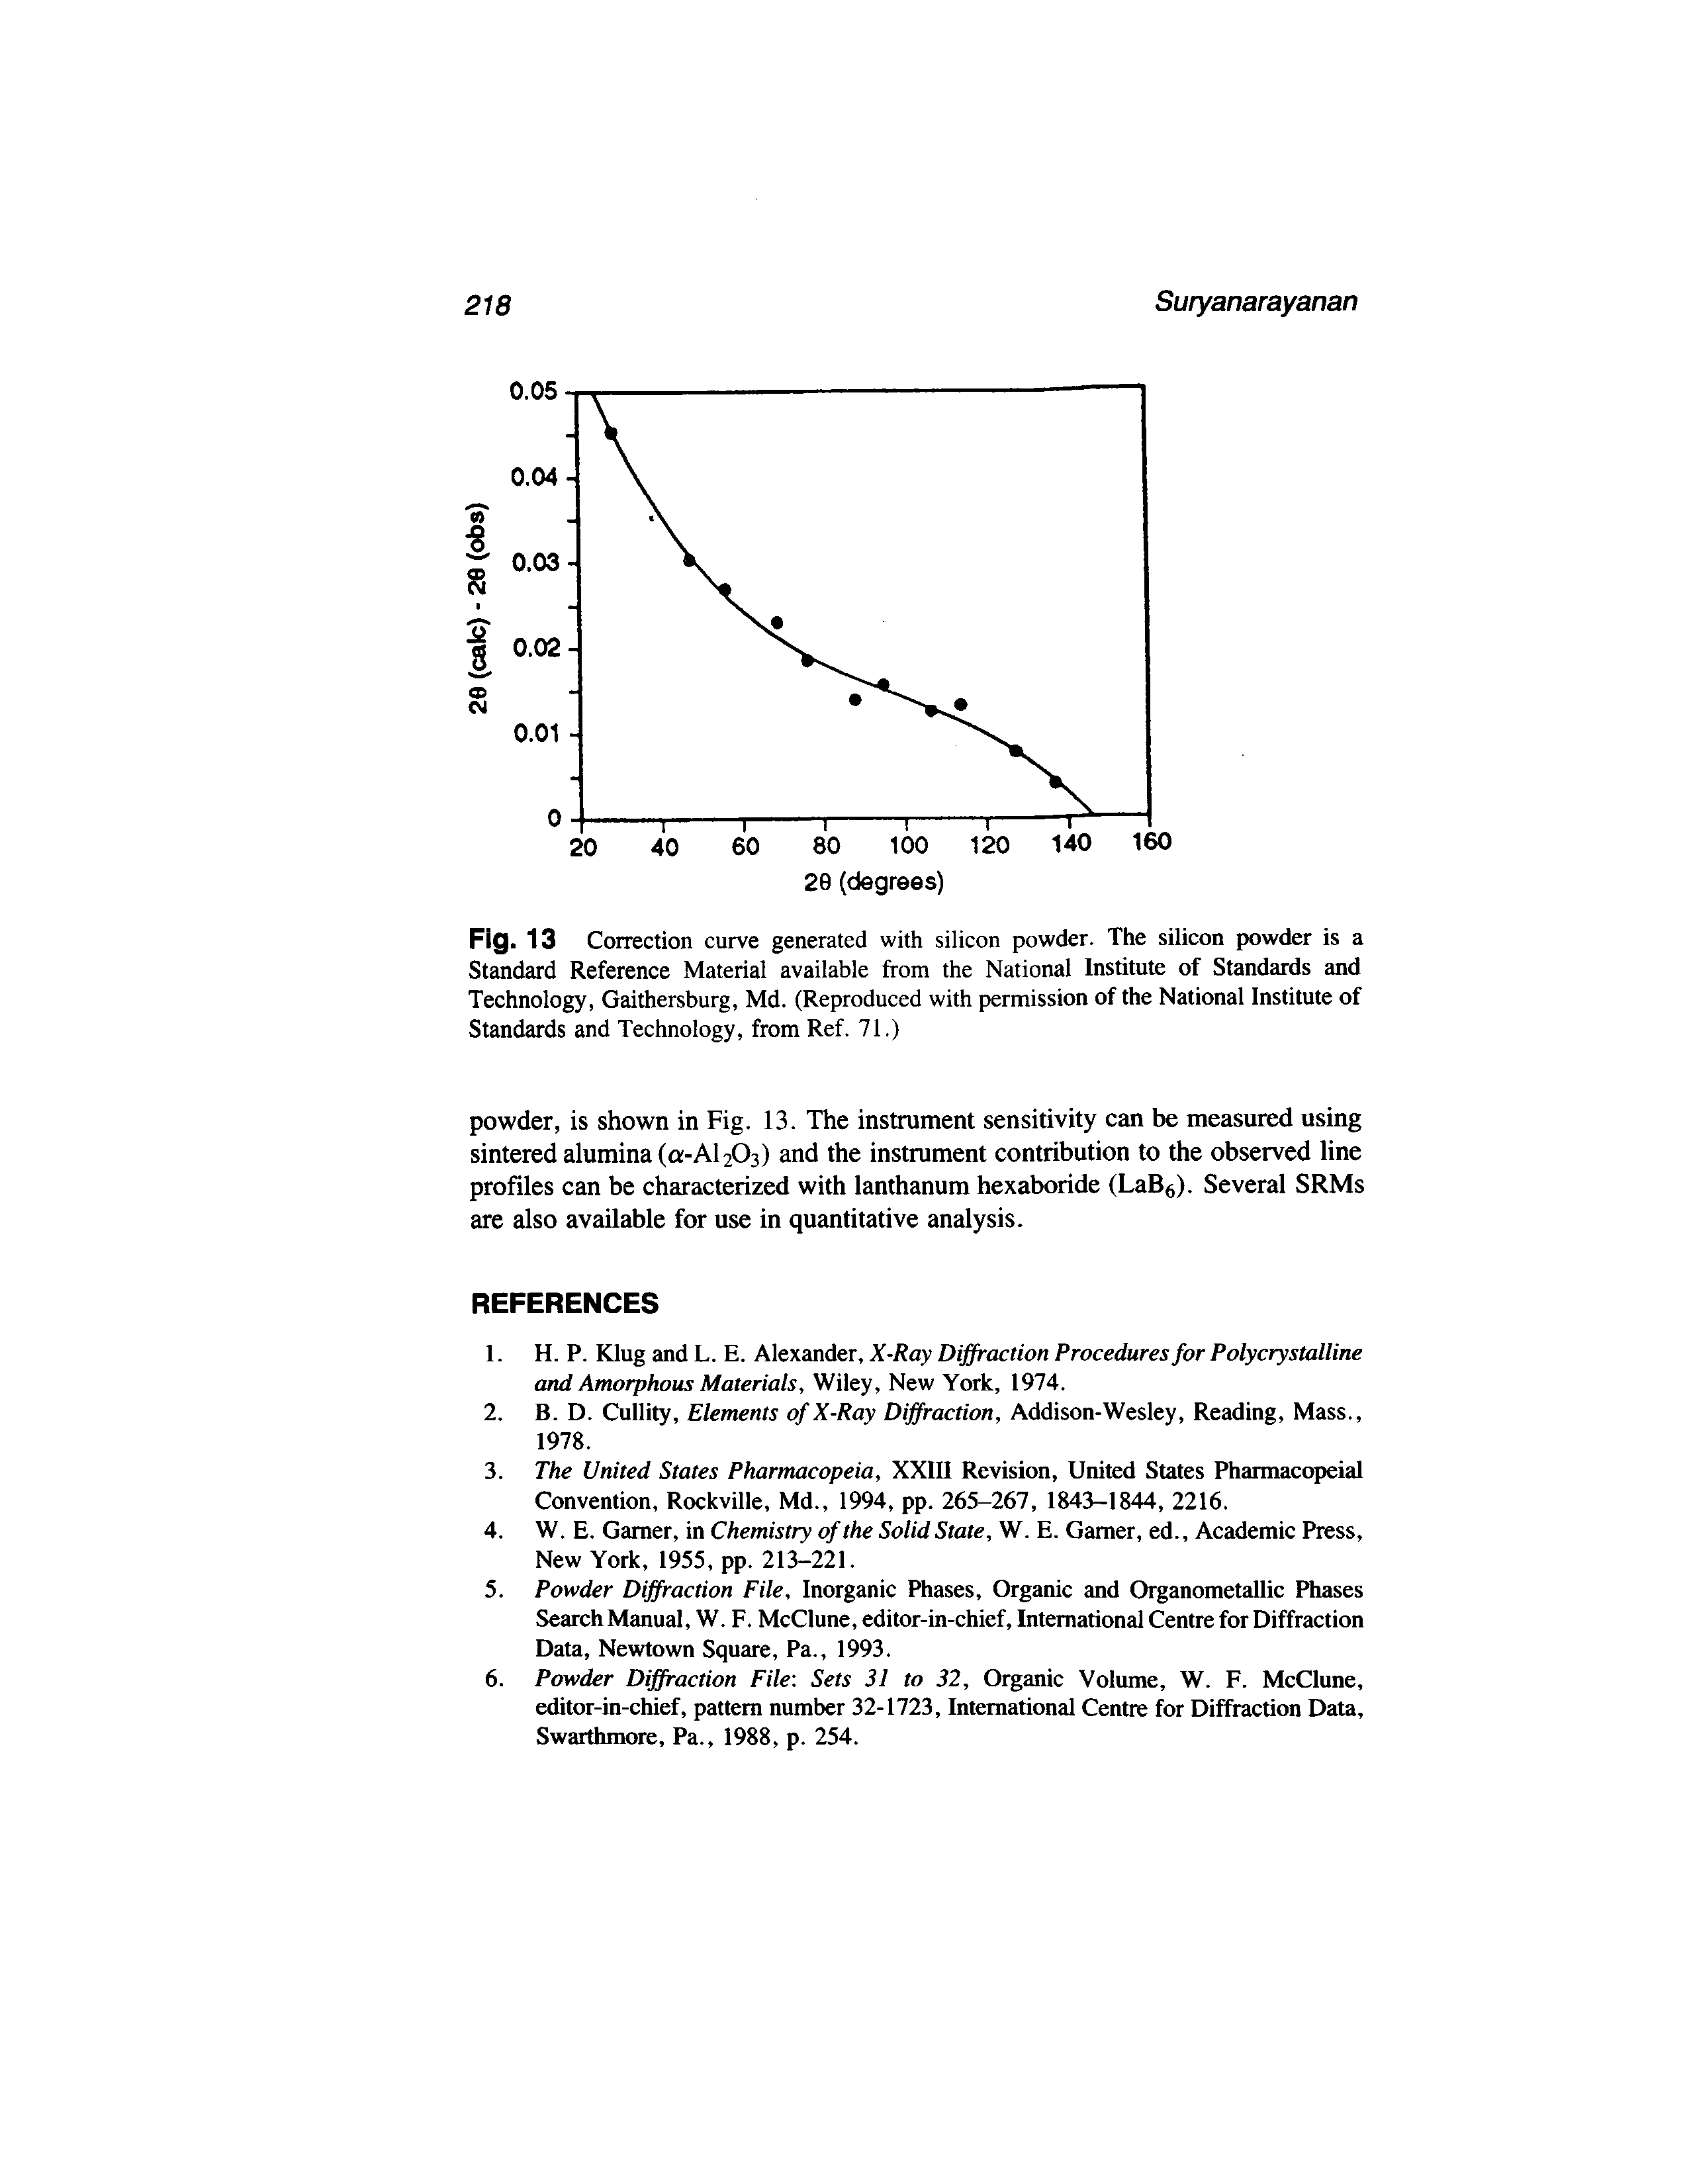 Fig. 13 Correction curve generated with silicon powder. The silicon powder is a Standard Reference Material available from the National Institute of Standards and Technology, Gaithersburg, Md. (Reproduced with permission of the National Institute of Standards and Technology, from Ref. 71.)...